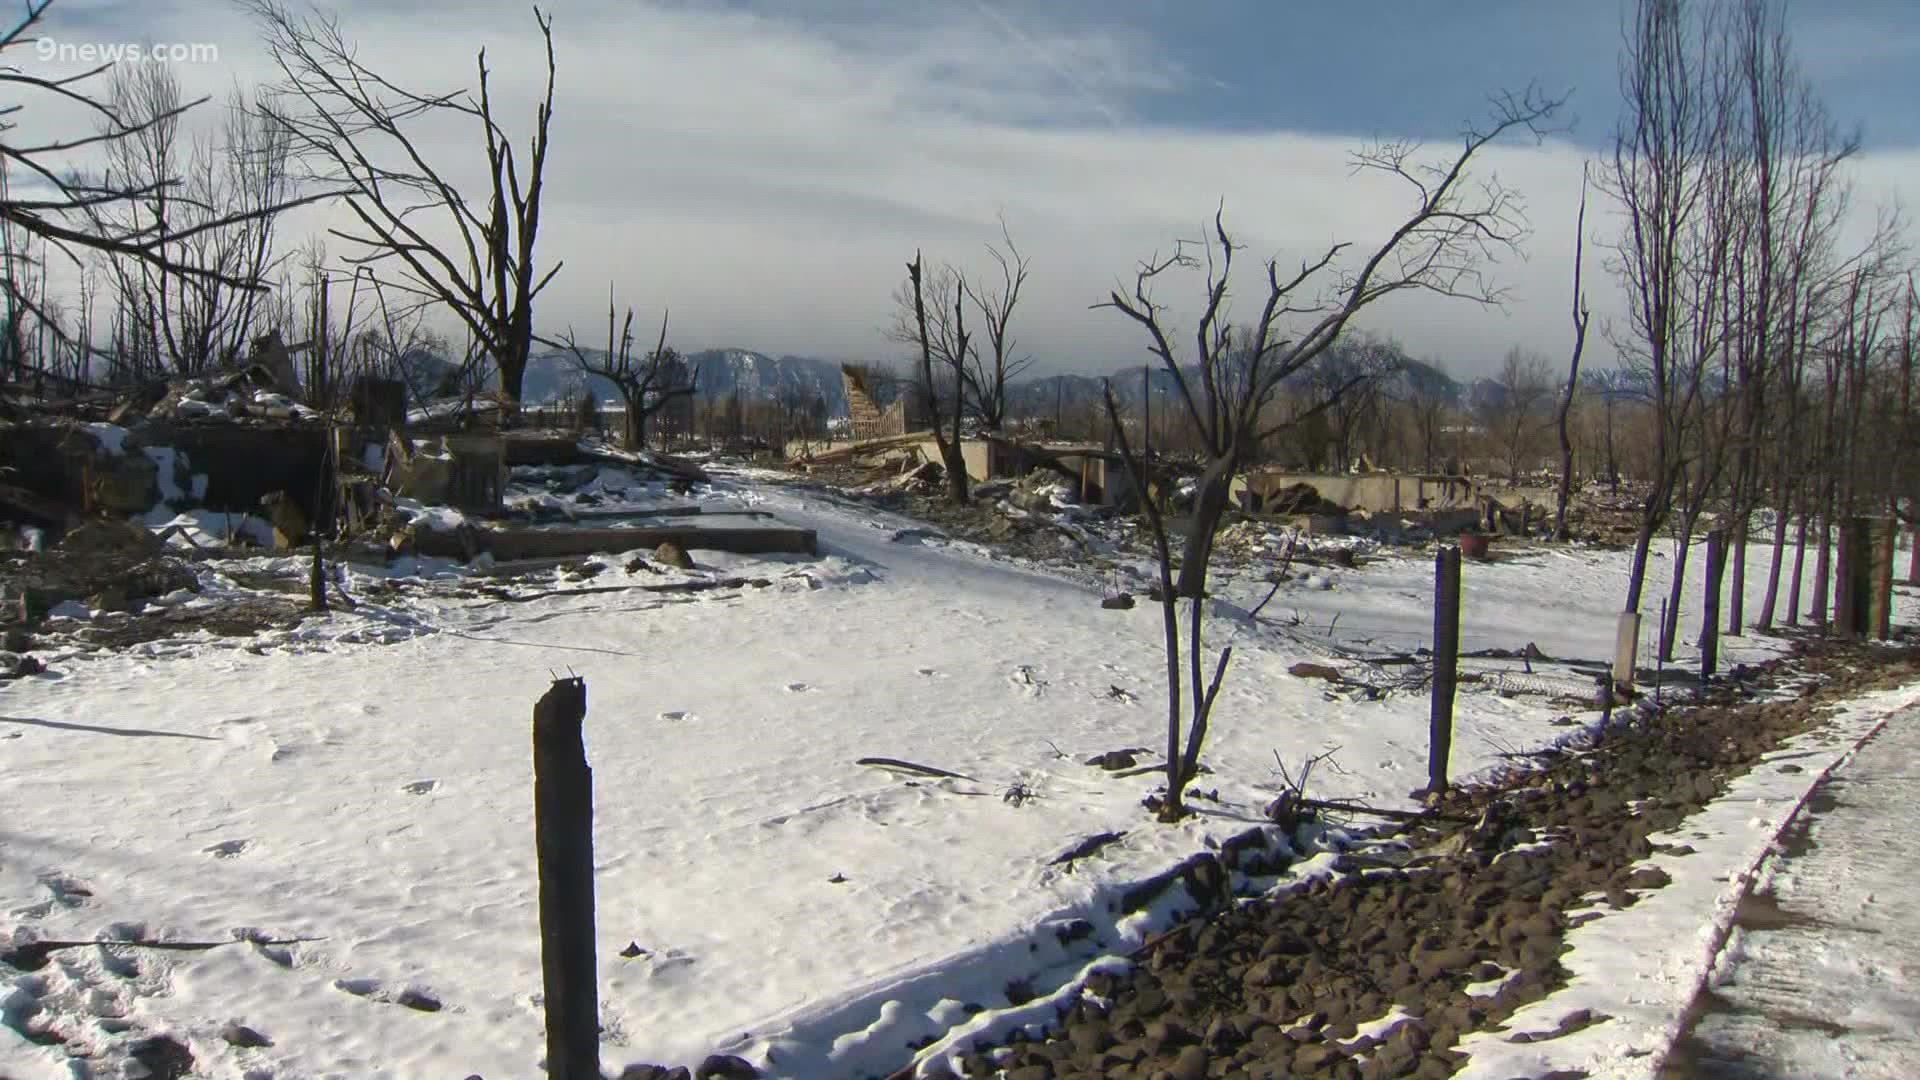 The Community Foundation of Boulder County has approved a grant to begin immediately dispersing $5 million in direct aid to those impacted by the Marshall Fire.